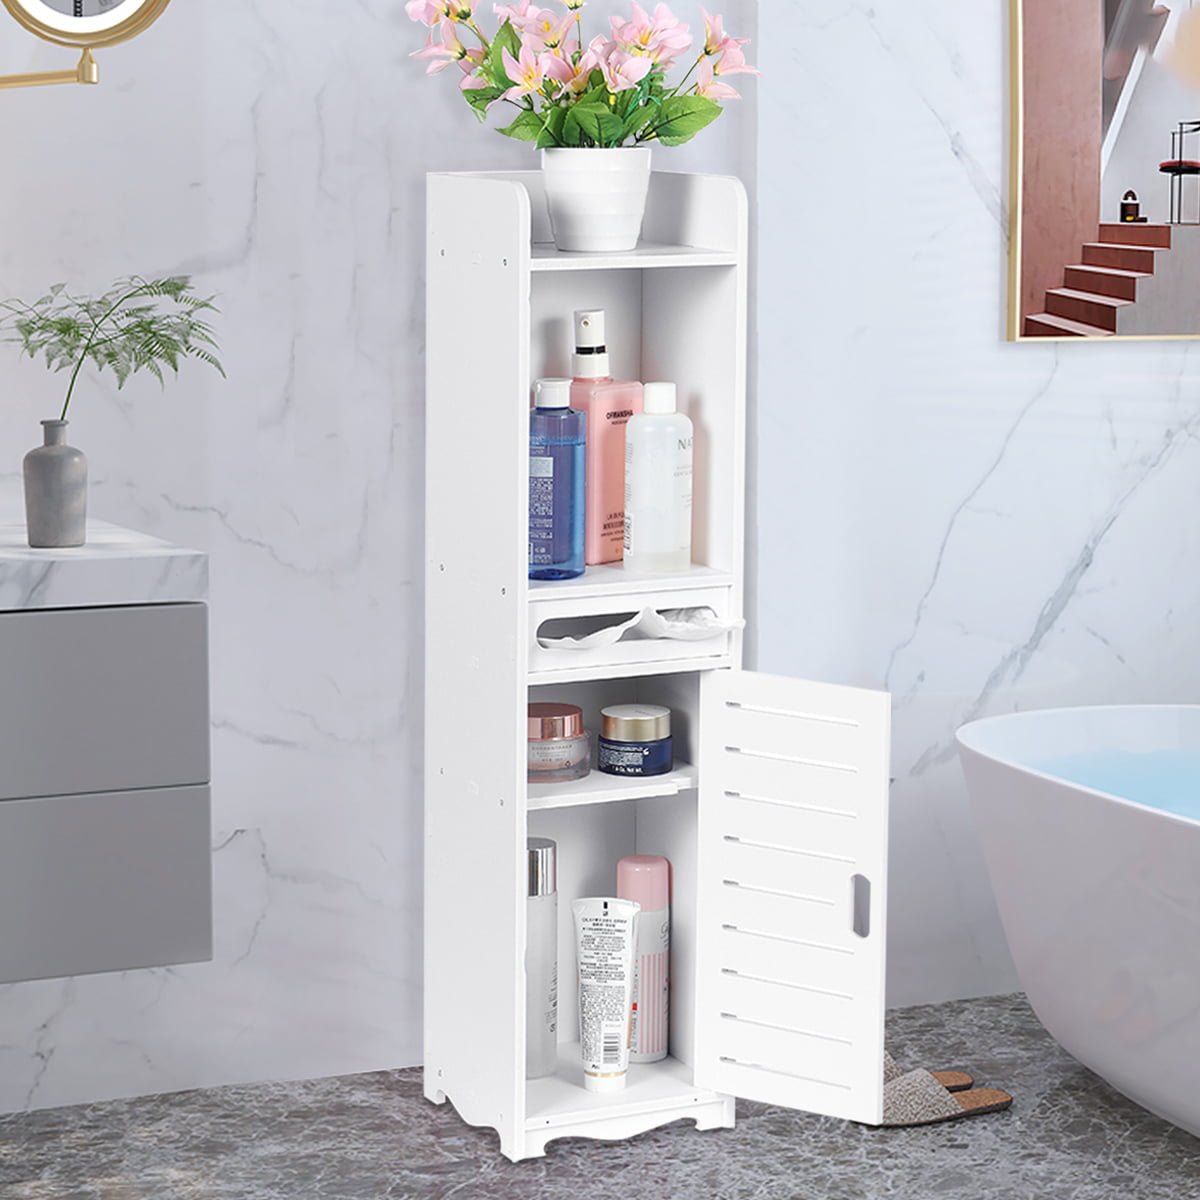 Thin Storage Bathroom Organizer for Paper Shampoo Small Bathroom Corner Floor Cabinet with Doors and Shelves White HOMCOM Toilet Paper Cabinet